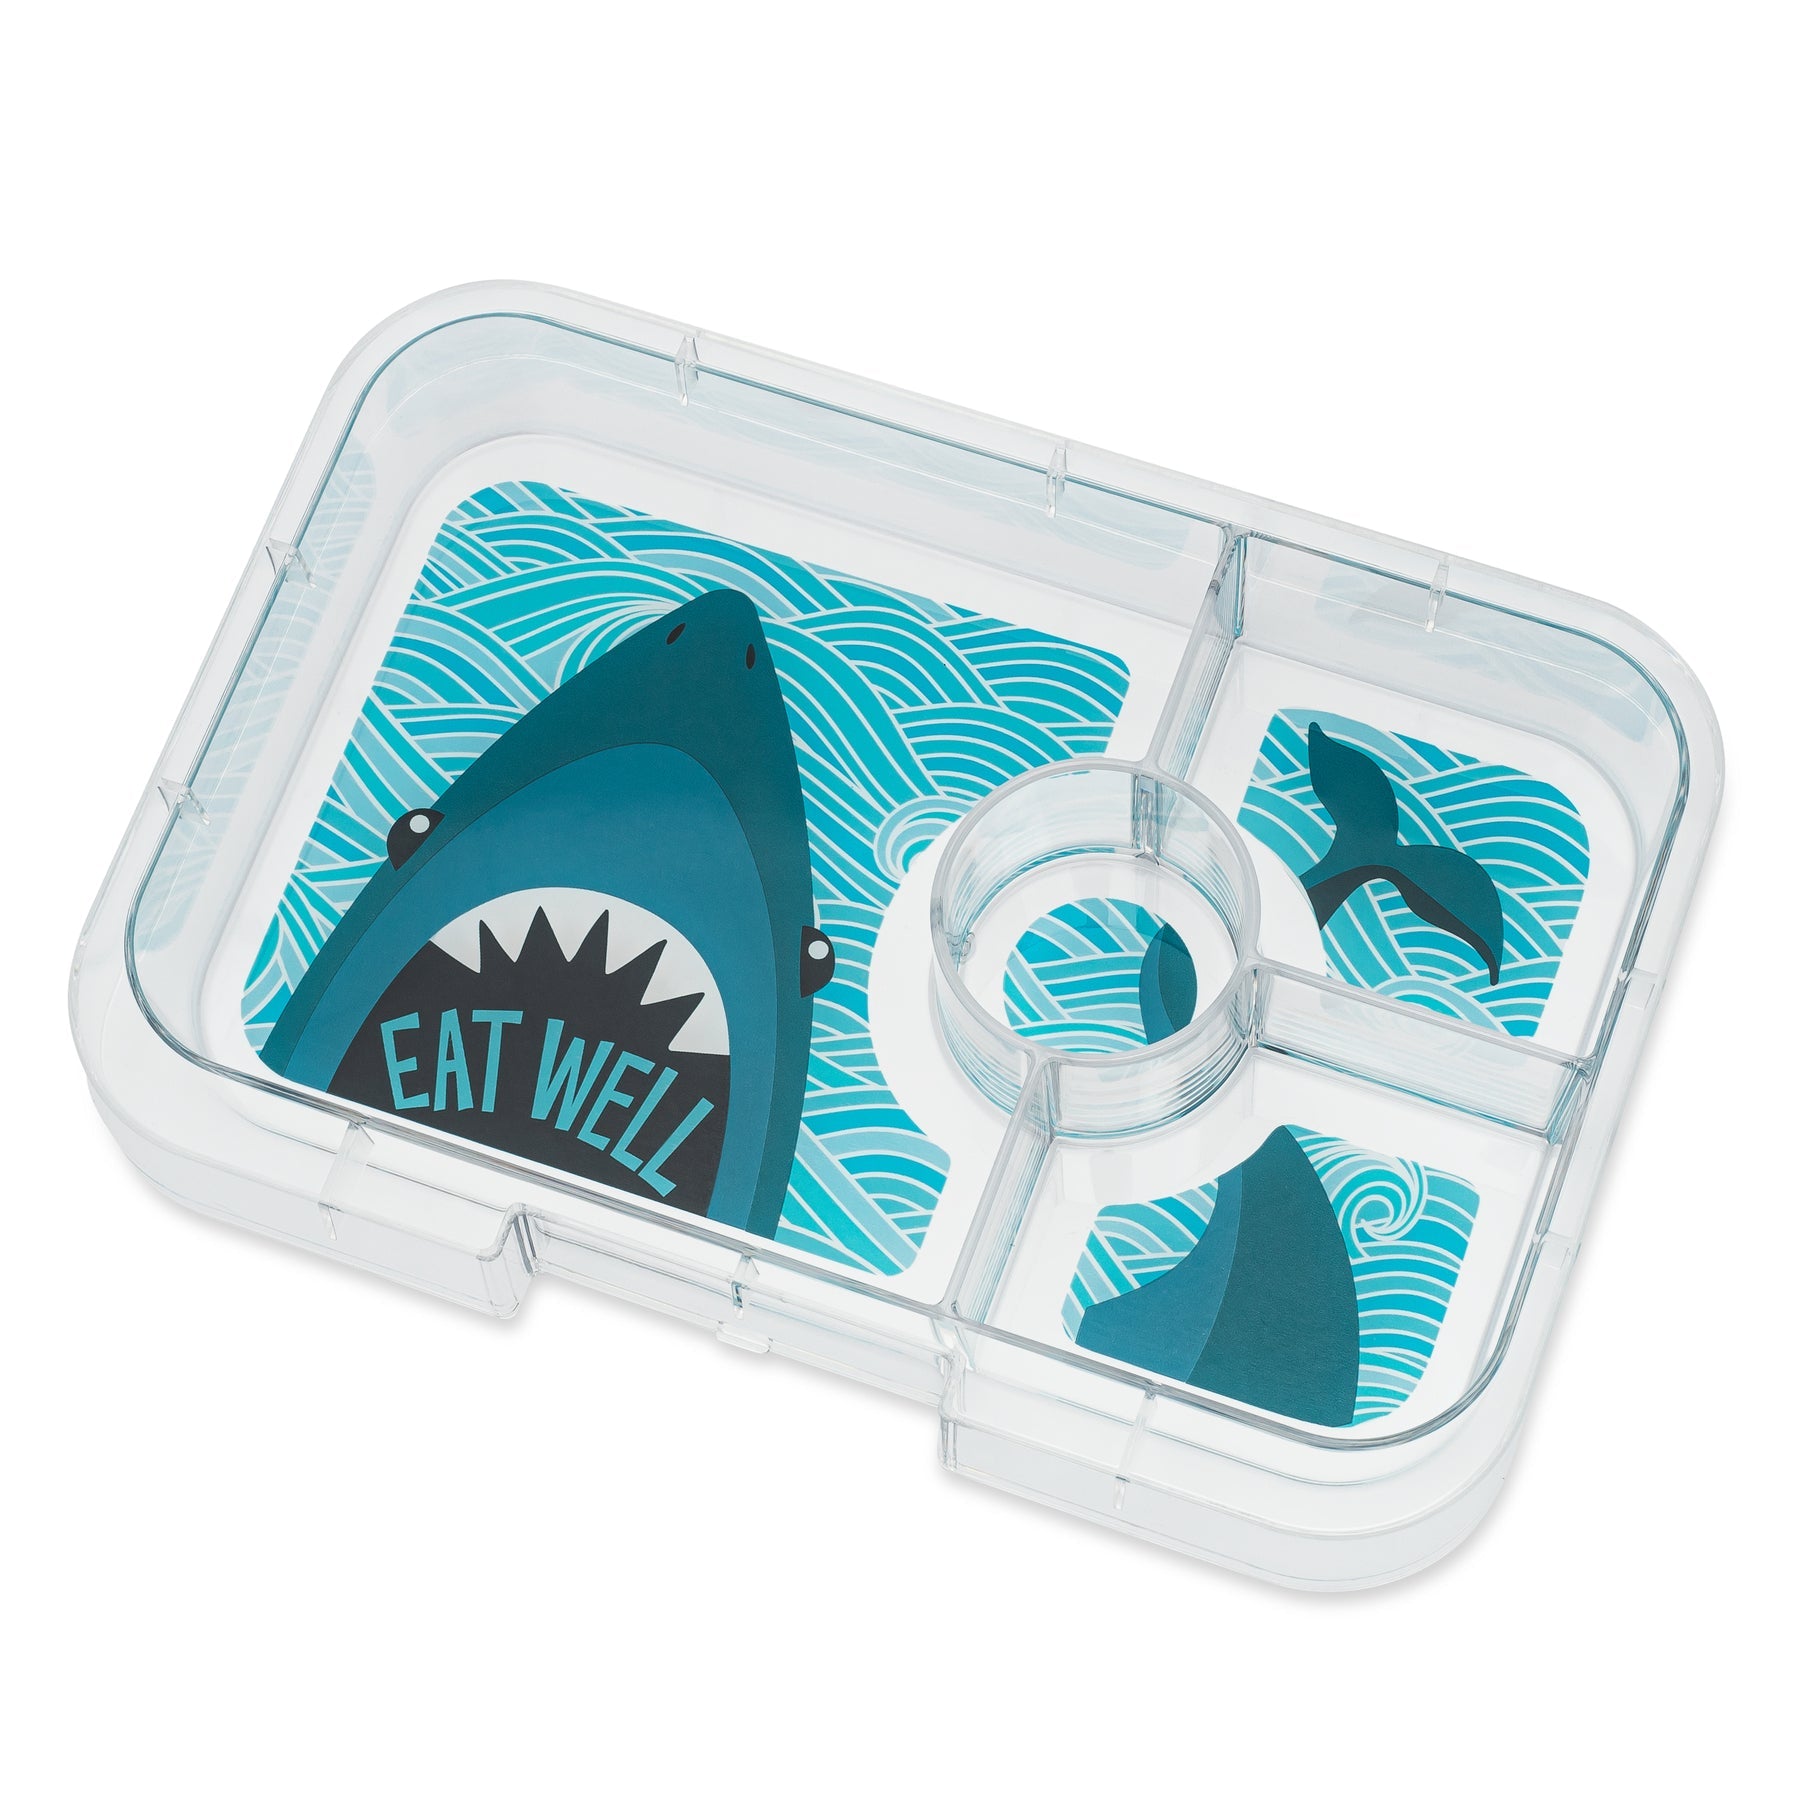 https://cdn.shopify.com/s/files/1/2028/9645/products/laguildeculinaire-yumbox-TRIII2021104SK-tapas-4-compartment-shark-tray-1800px-01.jpg?v=1660858670&width=1800